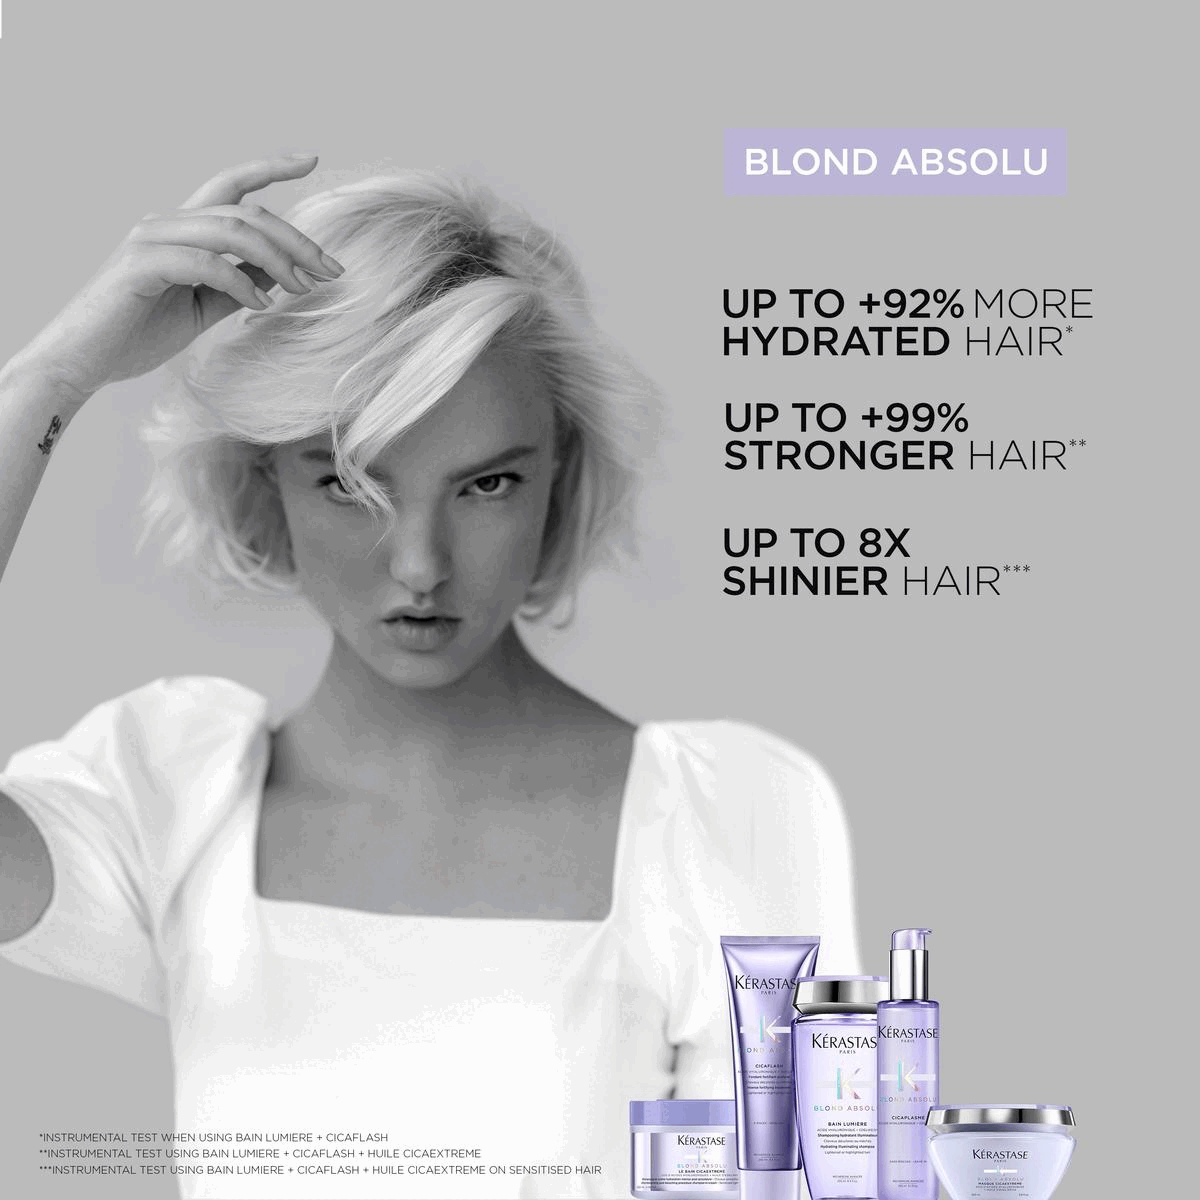 Image 1, BLOND ABSOLU UP TO +92% MORE HYDRATED HAIR* UP TO +99% STRONGER HAIR** UP TO 8X SHINIER HAIR*** *INSTRUMENTAL TEST WHEN USING BAIN LUMIERE + CICAFLASH **INSTRUMENTAL TEST USING BAIN LUMIERE + CICAFLASH + HUILE CICAEXTREME ***INSTRUMENTAL TEST USING BAIN LUMIERE + CICAFLASH + HUILE CICAEXTREME ON SENSITISED HAIR Image 2, ANTI-OXIDANTS, EDELWEISS FLOWER, HYALURONIC ACID Image 3, ANTI-BRASS PURPLE SHAMPOO, LIGHTENED, COOL BLONDE OR GREY HAIR